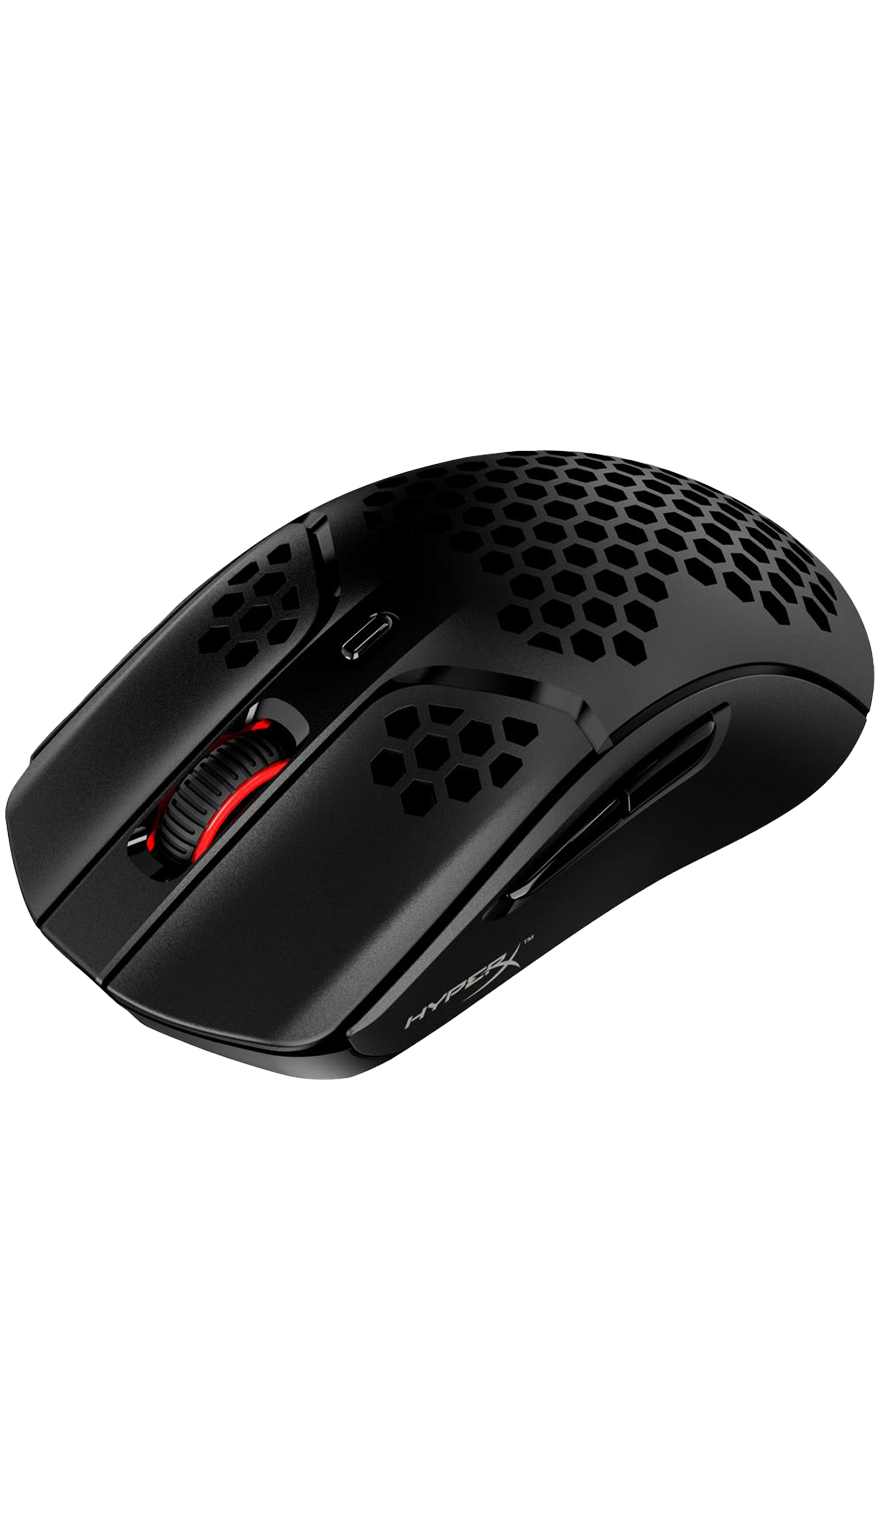 HYPERX Pulsefire Haste - Wireless Gaming Mouse